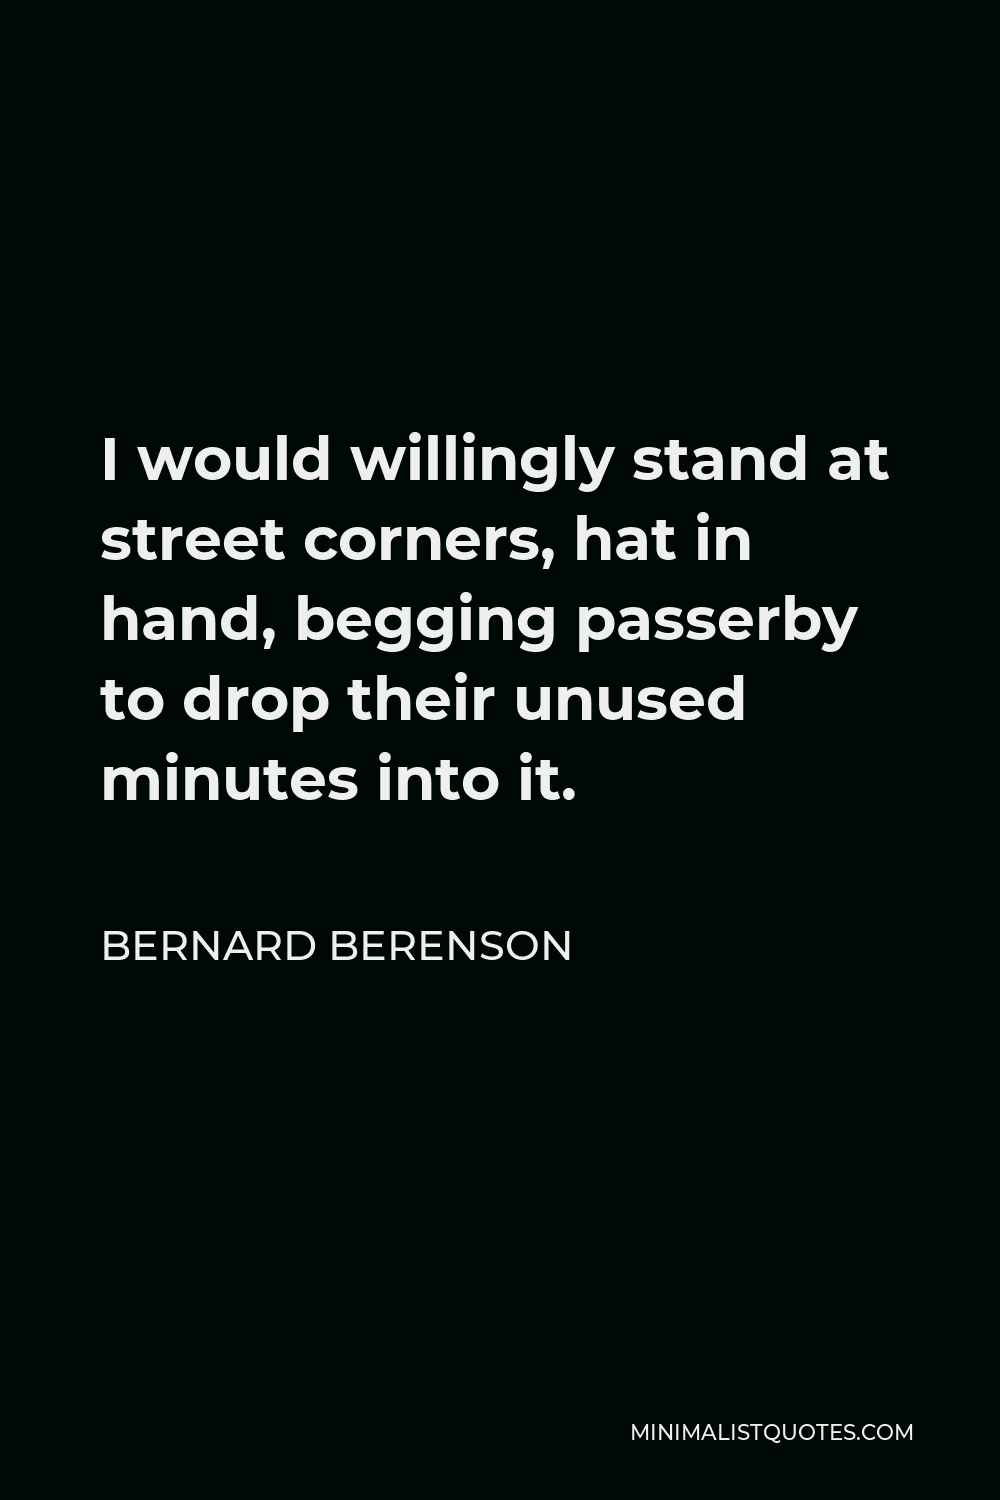 Bernard Berenson Quote - I would willingly stand at street corners, hat in hand, begging passerby to drop their unused minutes into it.